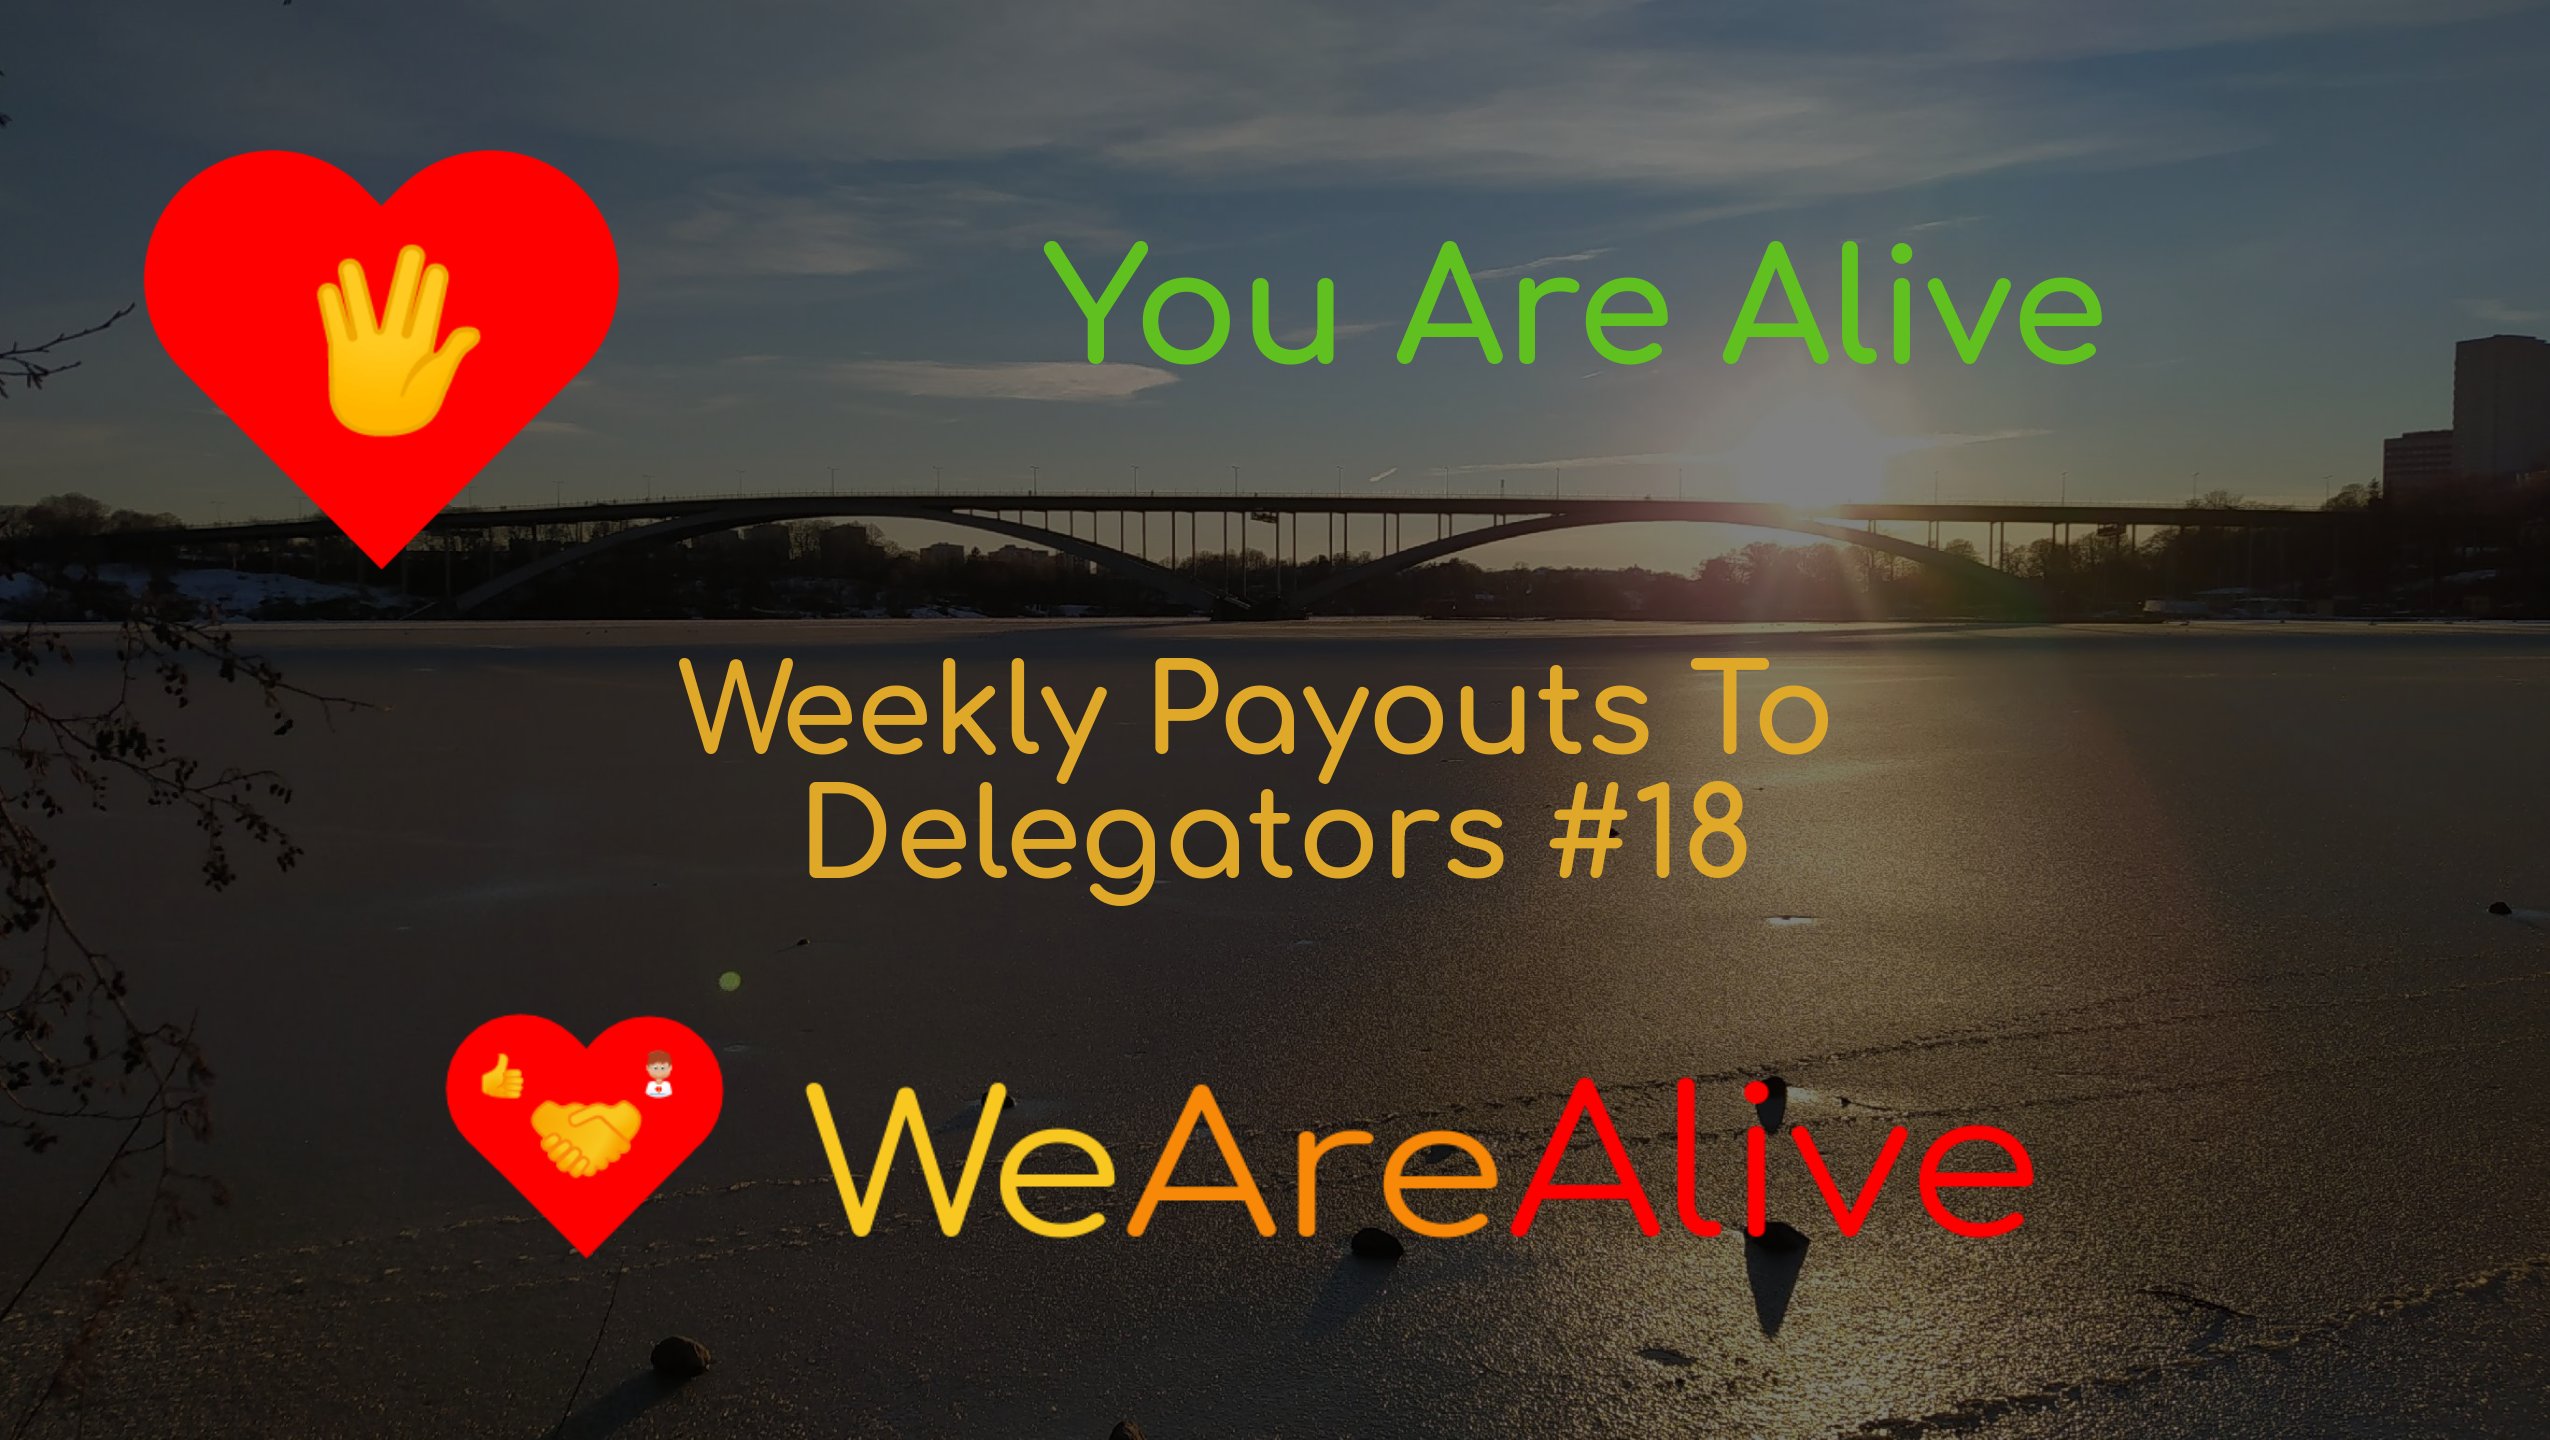 @youarealive/you-are-alive-weekly-payouts-to-delegators-18